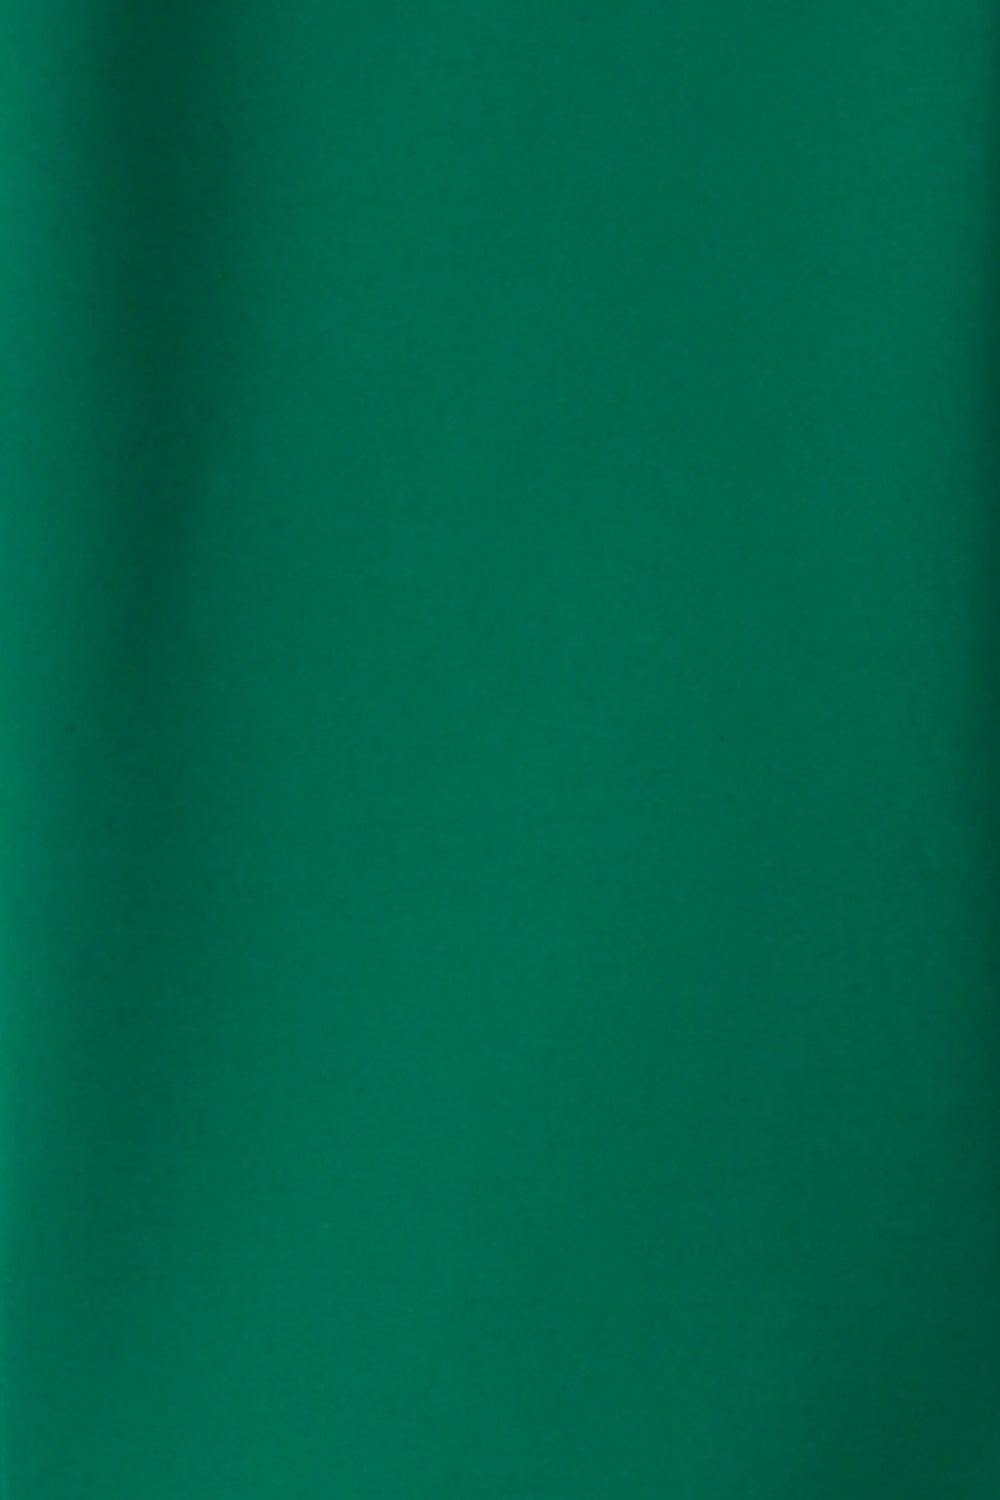 Swatch of emerald green ponte jersey used by Australian and New Zealand women's clothing brand, Leina & Fleur to make luxury quality jackets and pants..